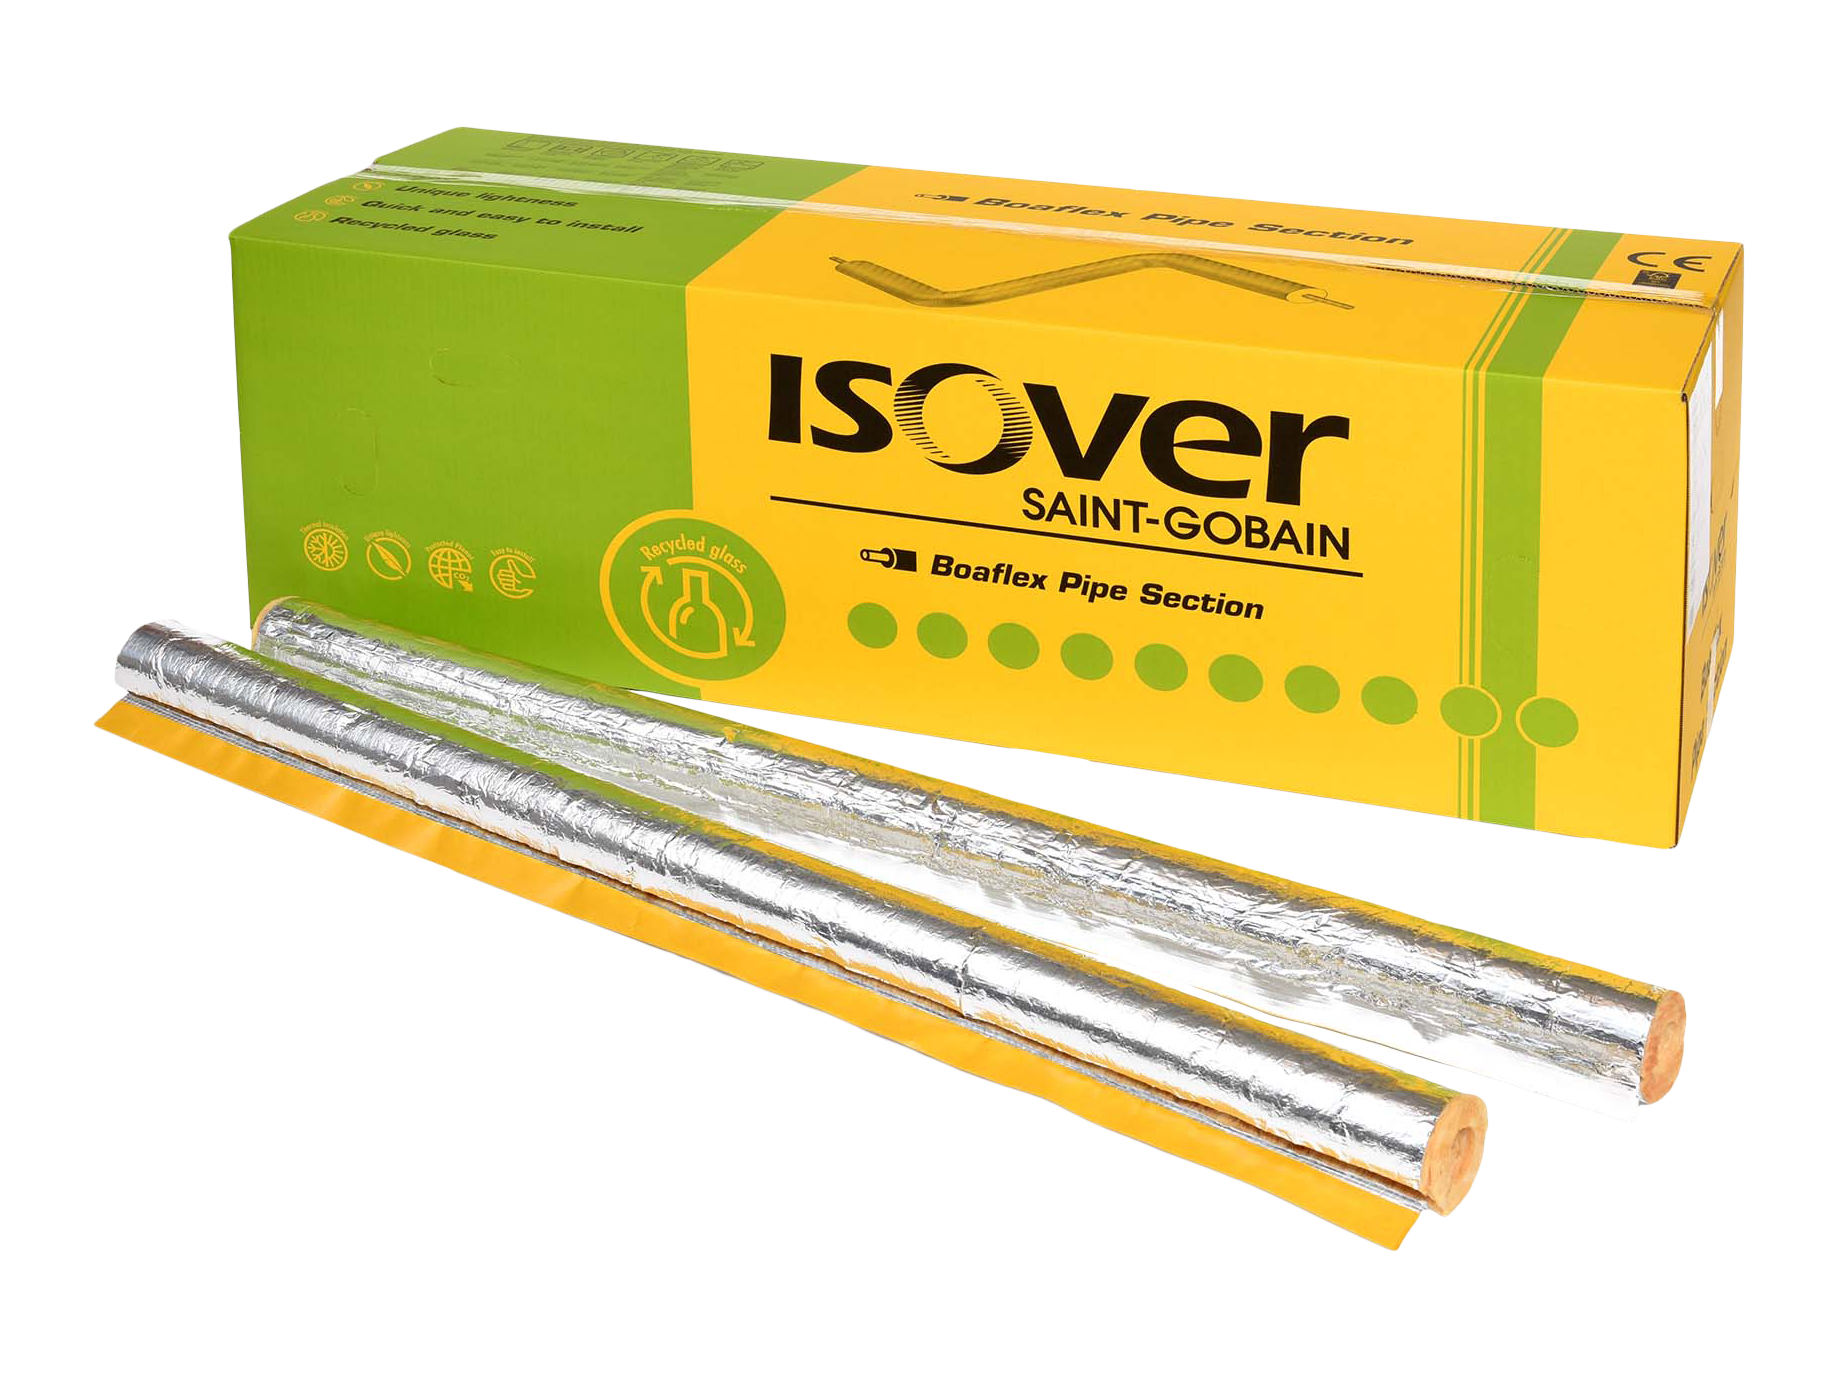 ISOVER Boaflex Pipe Section 18/20